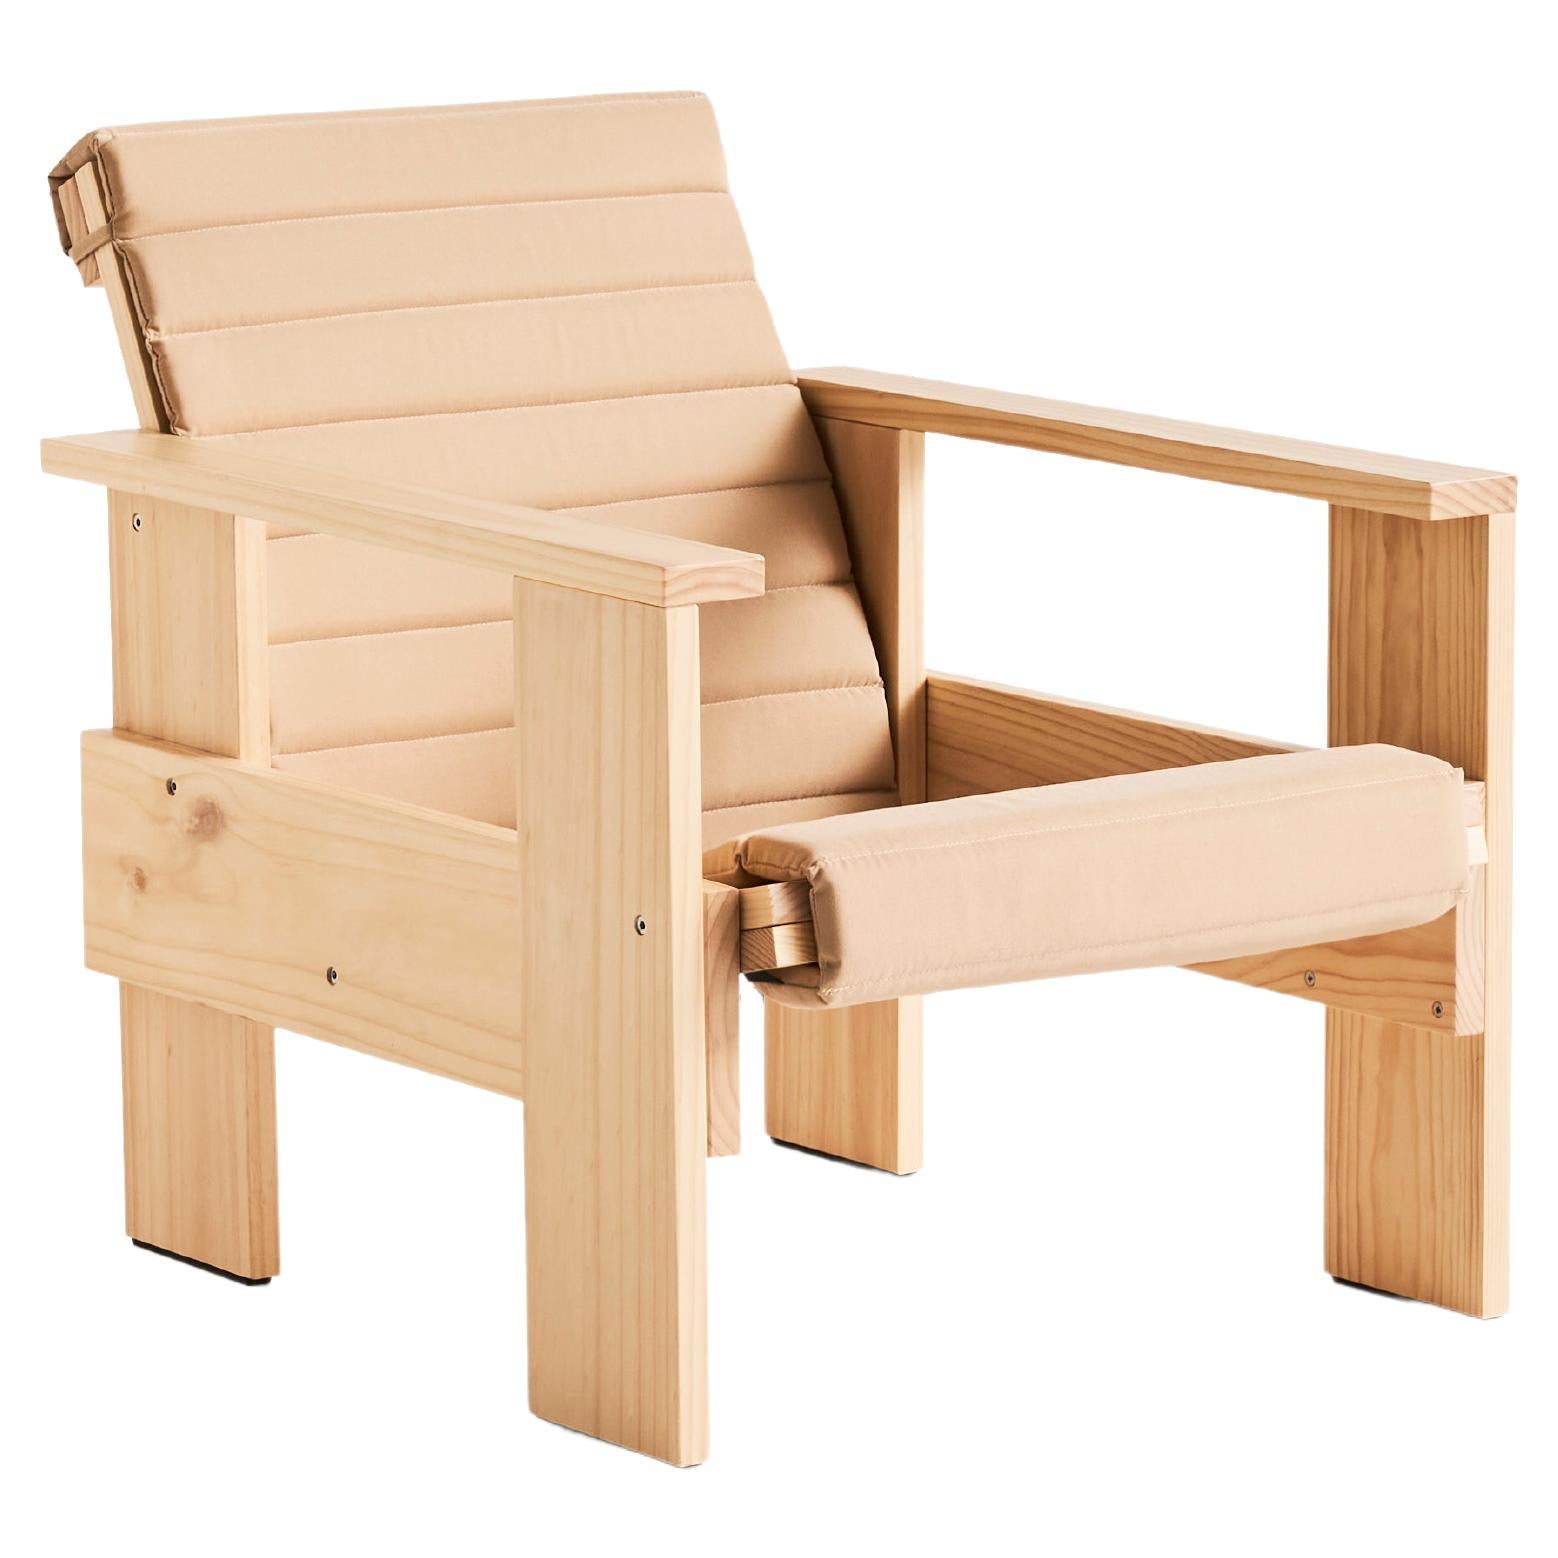 Crate Lounge Chair, Wb Lacquered Pinewood/ Q Cushion, by Gerrit Rietveld for Hay